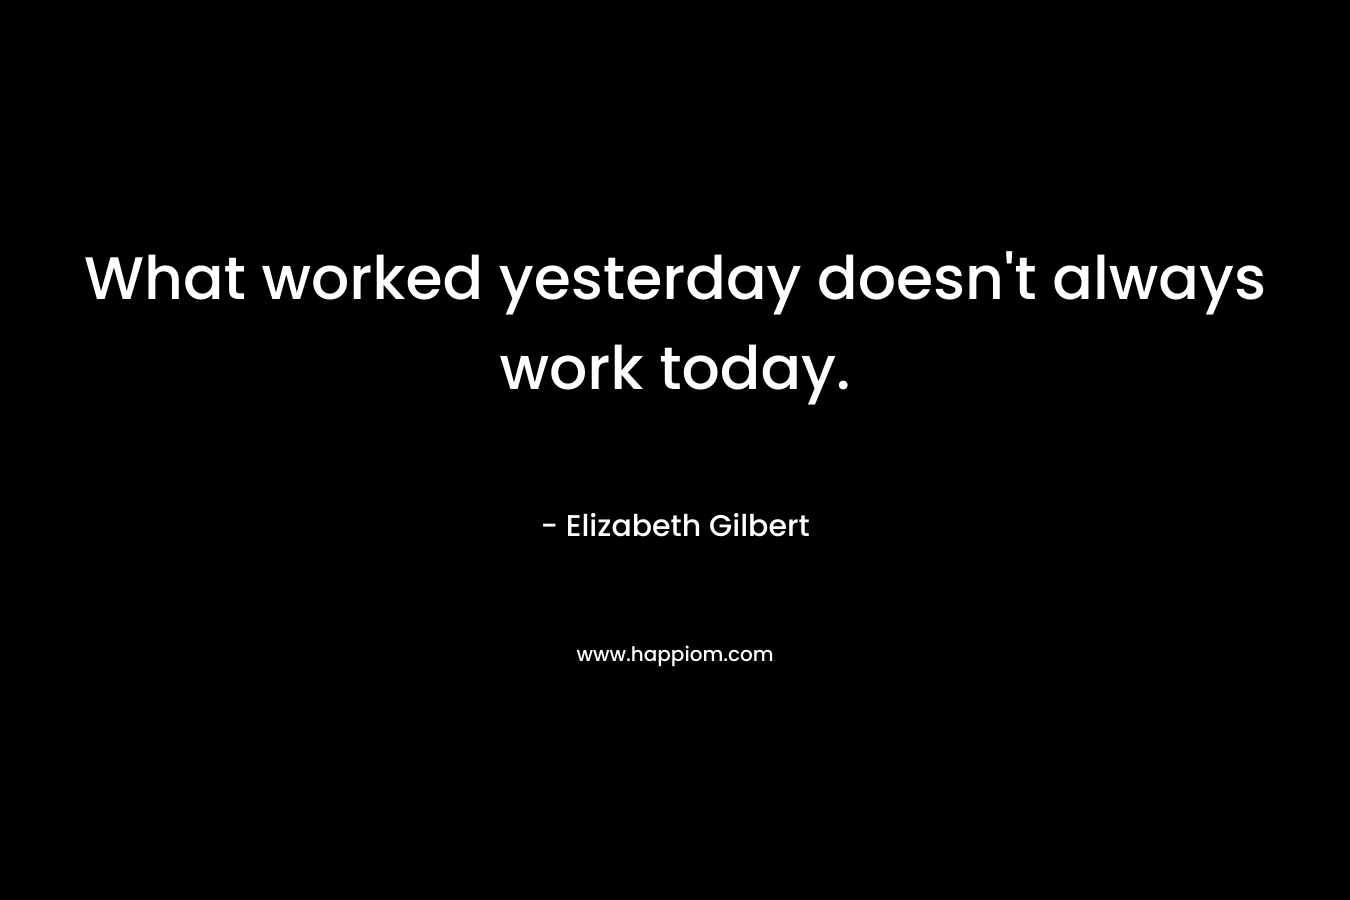 What worked yesterday doesn't always work today.